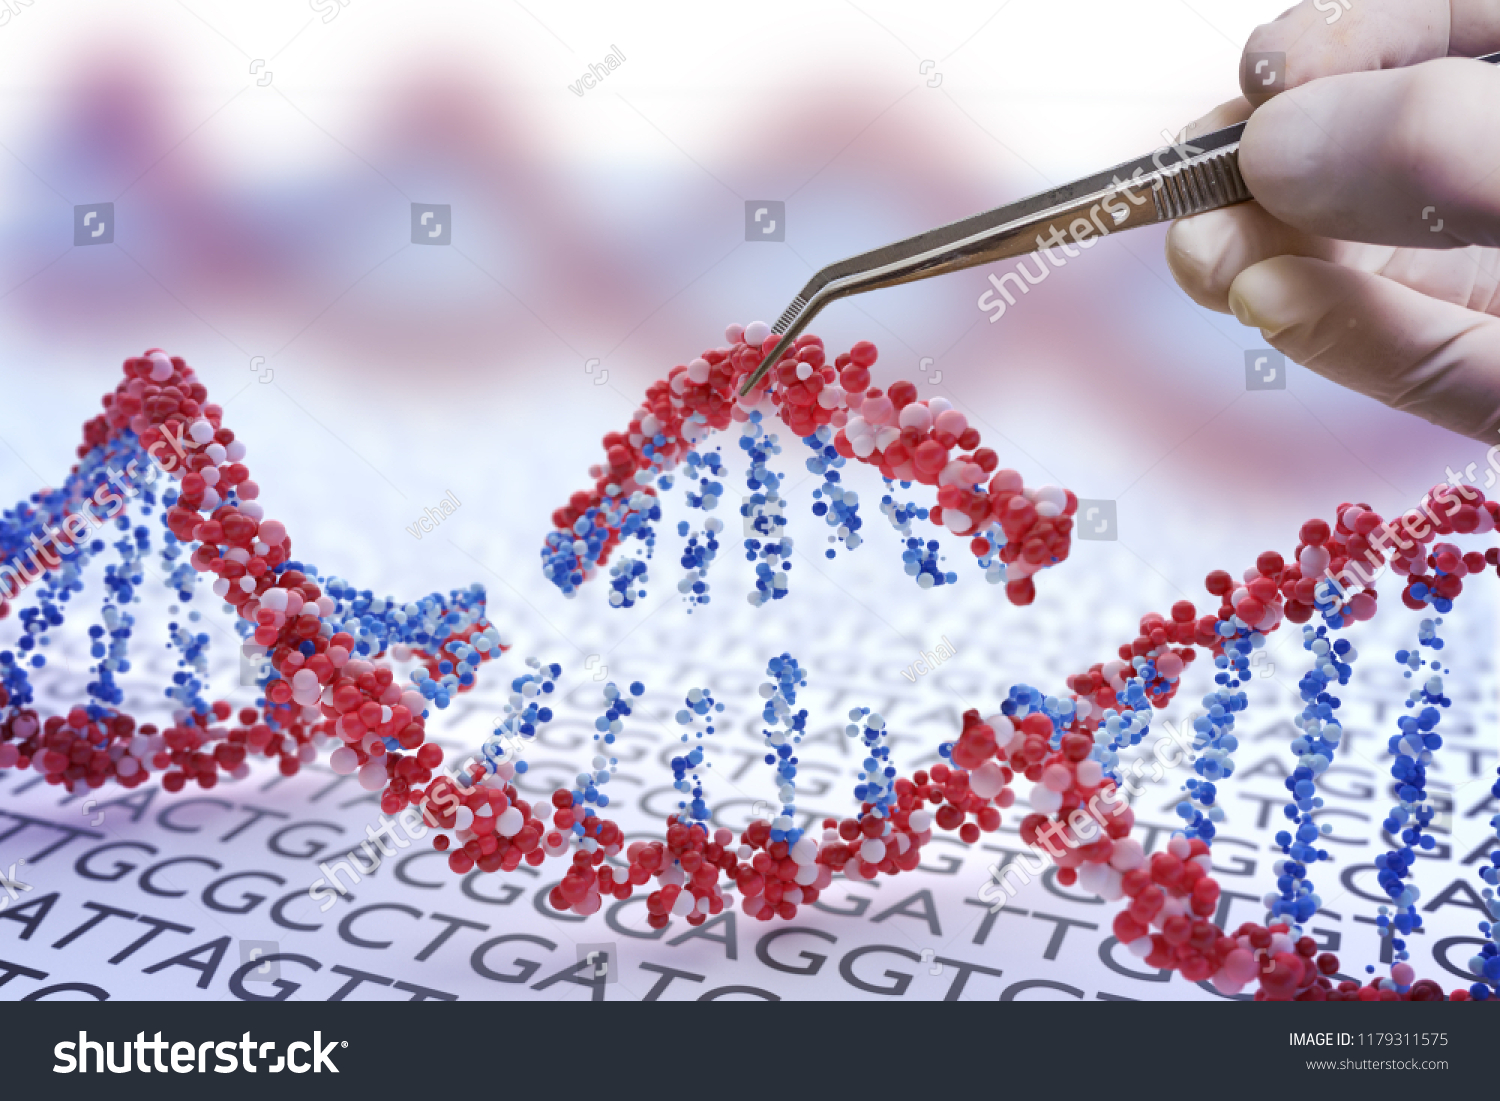 Genetic engineering, GMO and Gene manipulation concept. Hand is inserting sequence of DNA.  3D illustration of DNA. #1179311575